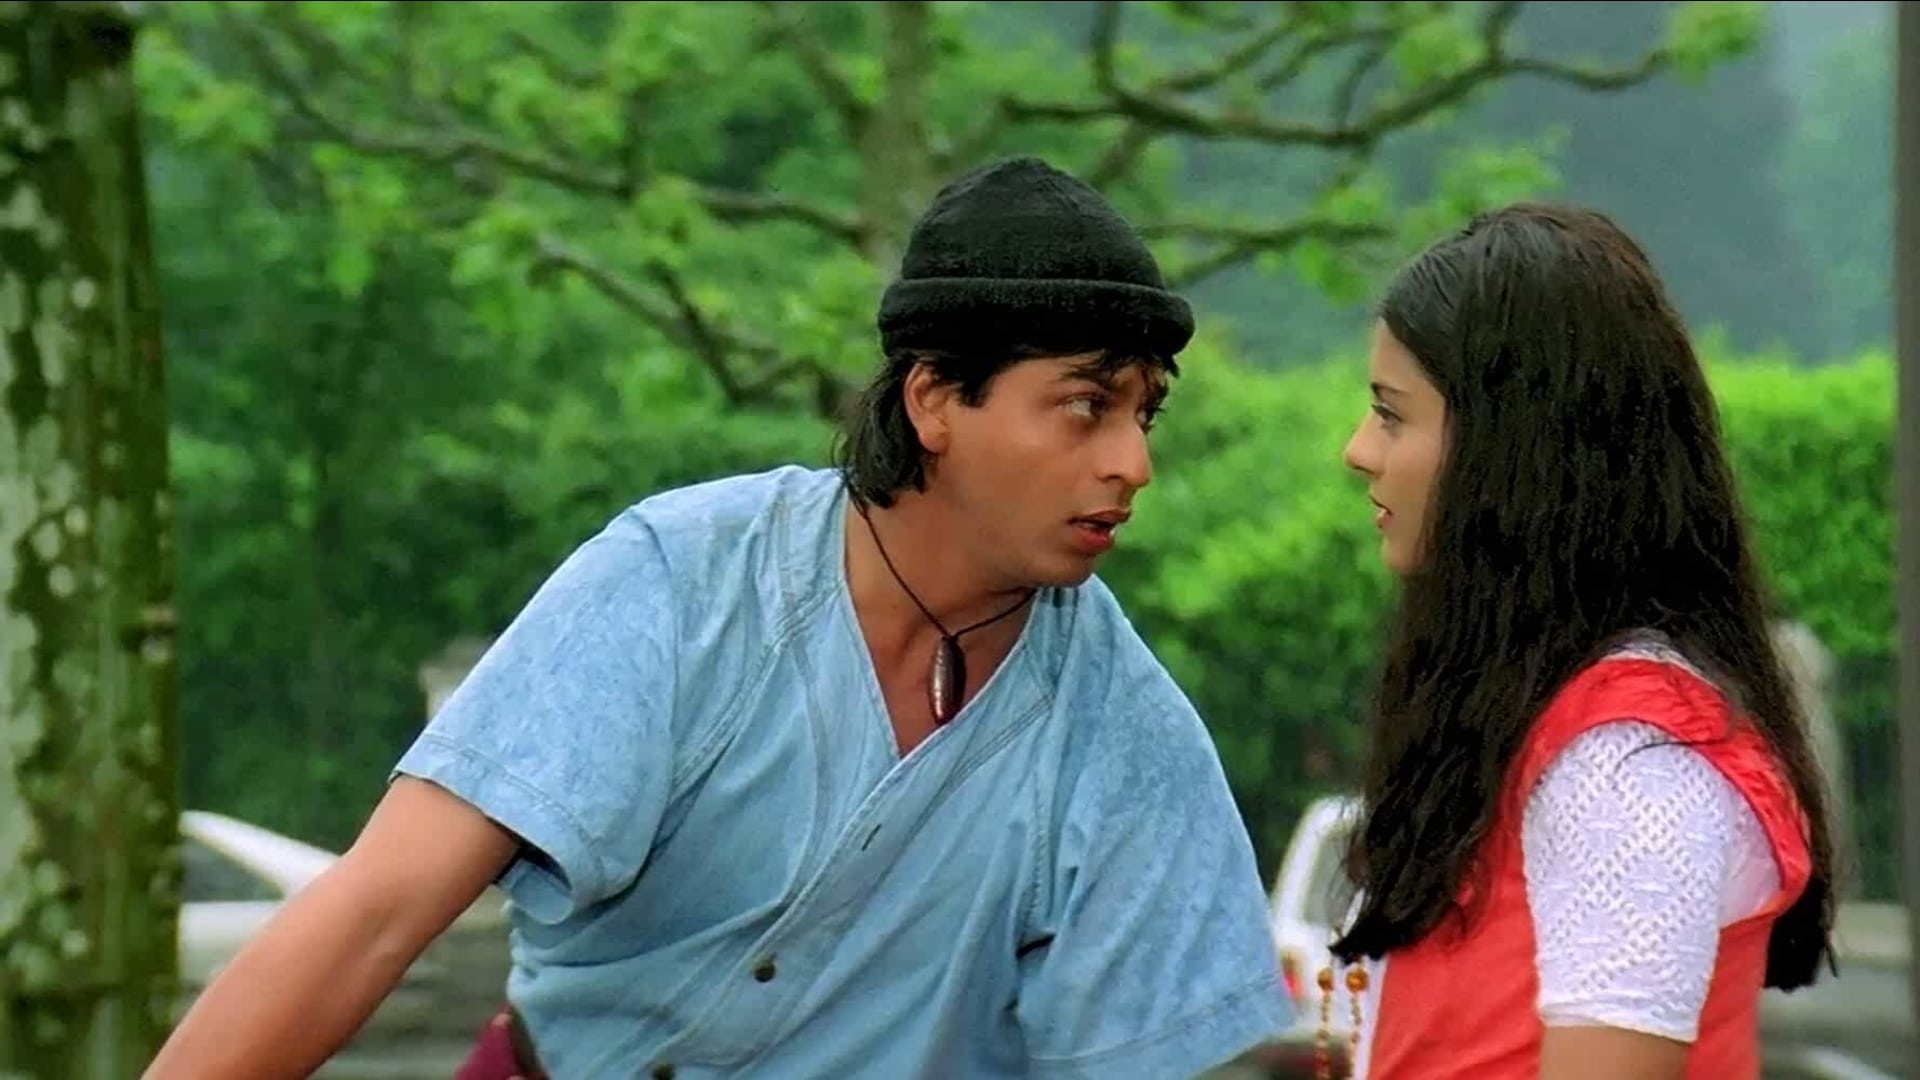 Dilwale Dulhania Le Jayenge - Movie info and showtimes in 